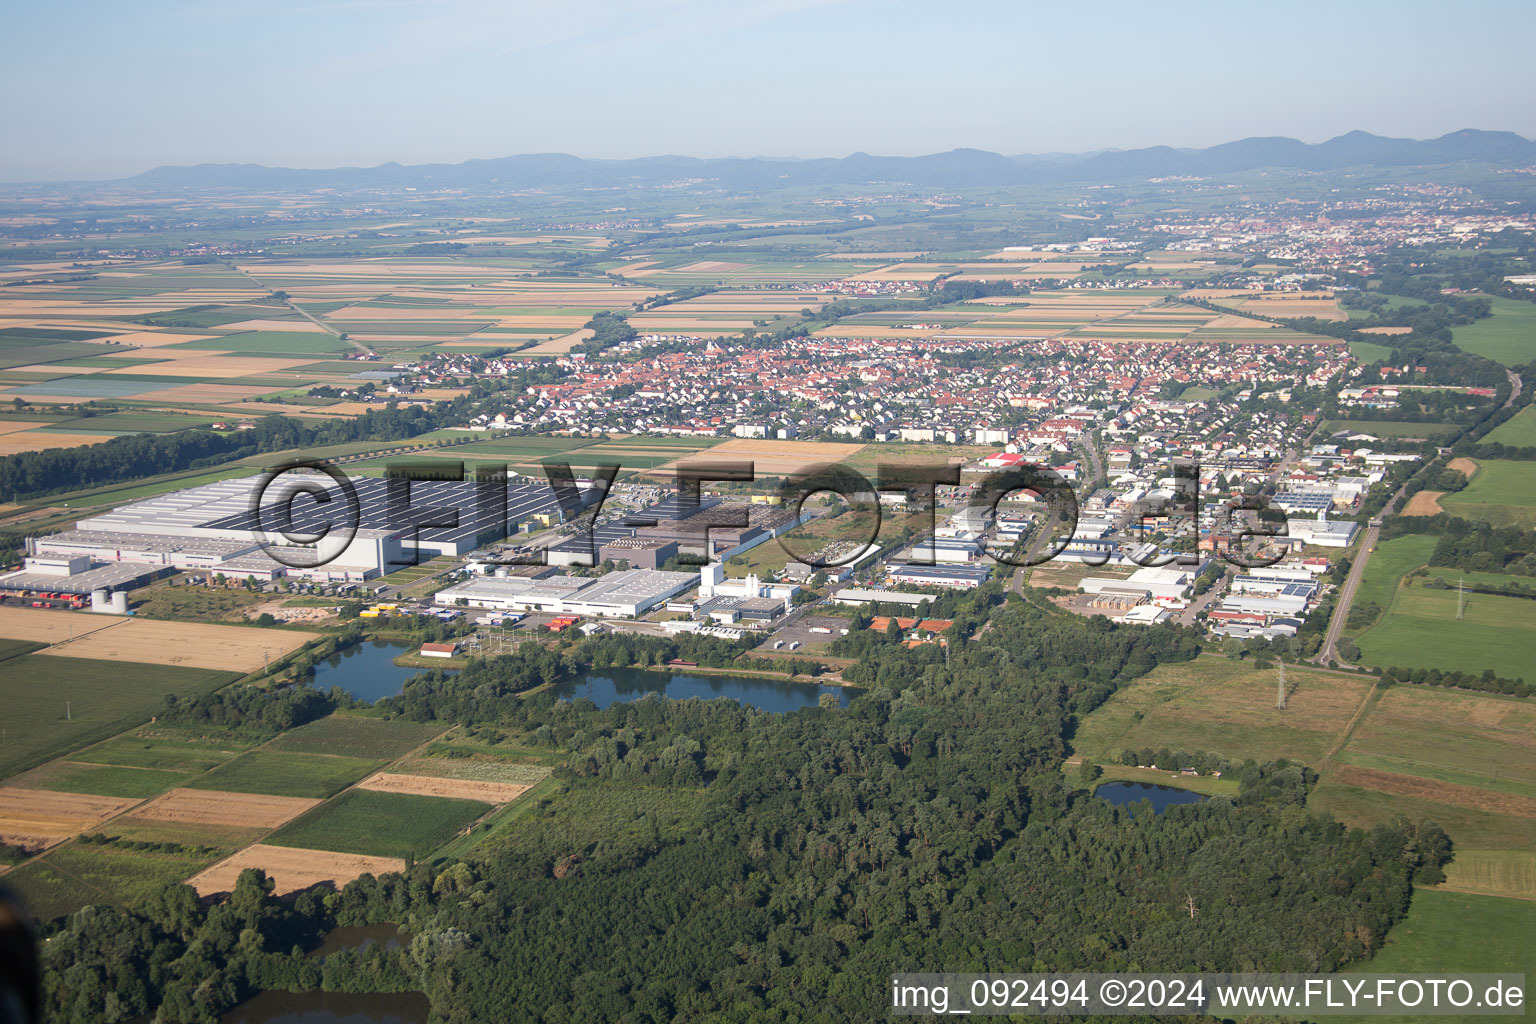 Industrial Estate in Offenbach an der Queich in the state Rhineland-Palatinate, Germany seen from above